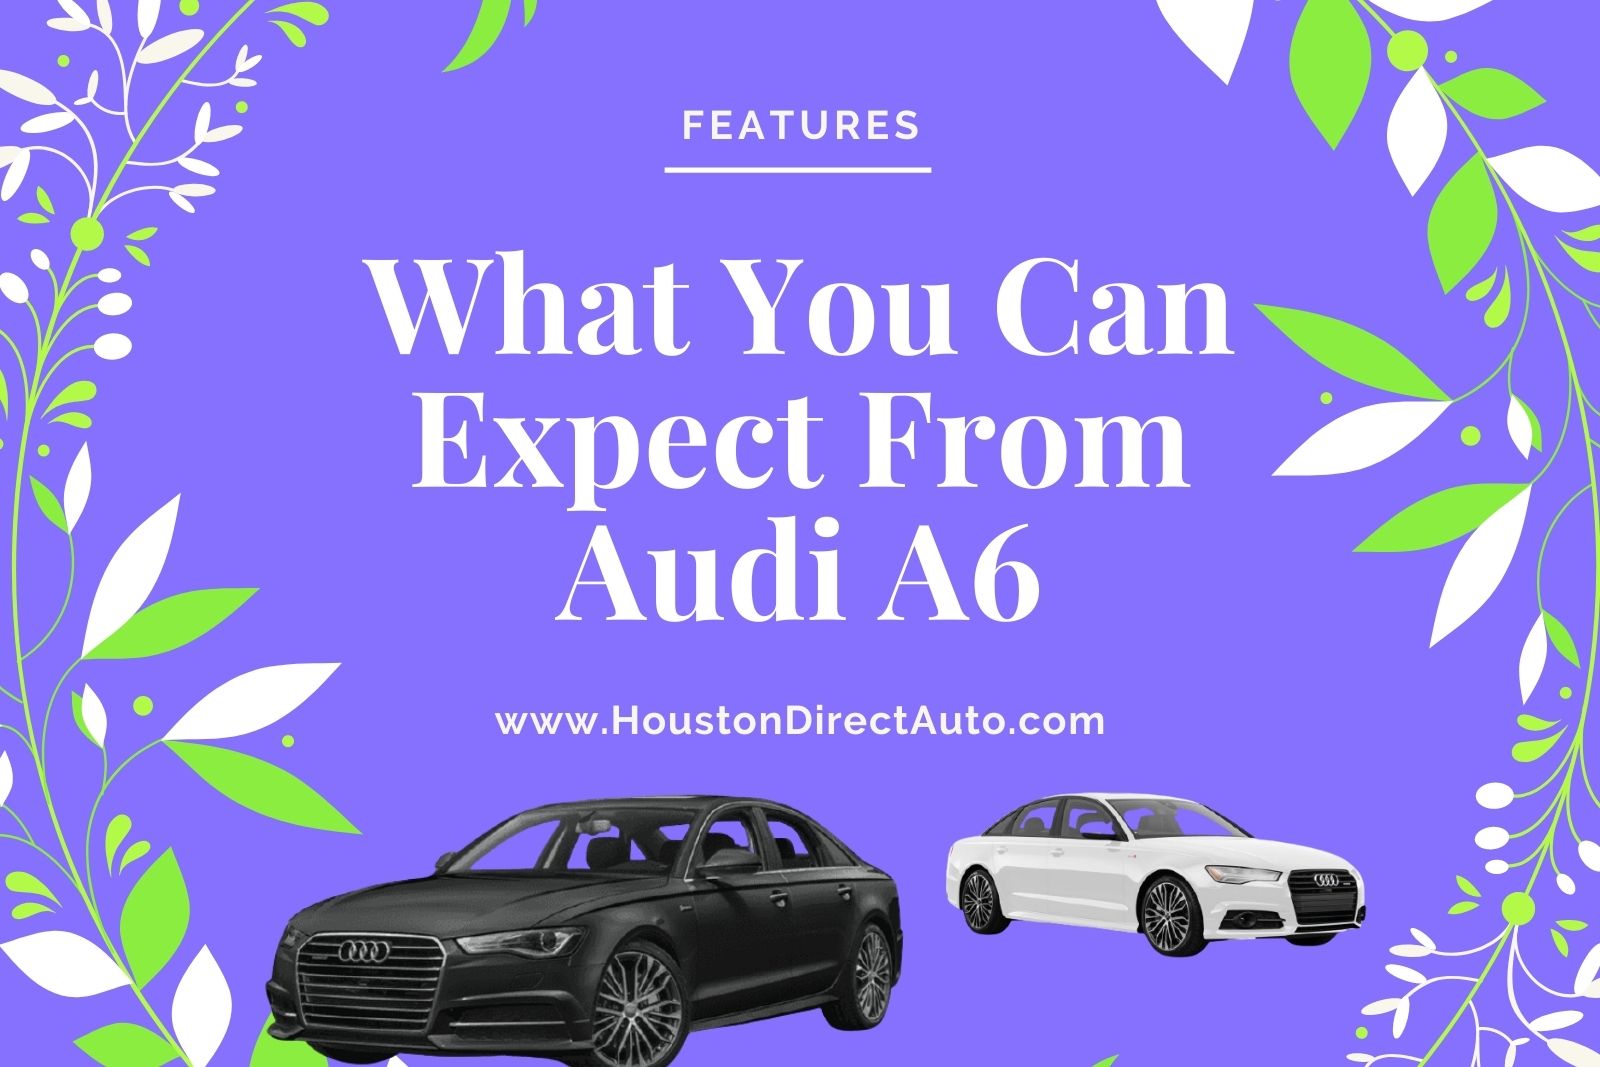 What You Can Expect From Audi A6 - Used Audi Cars For Sale?